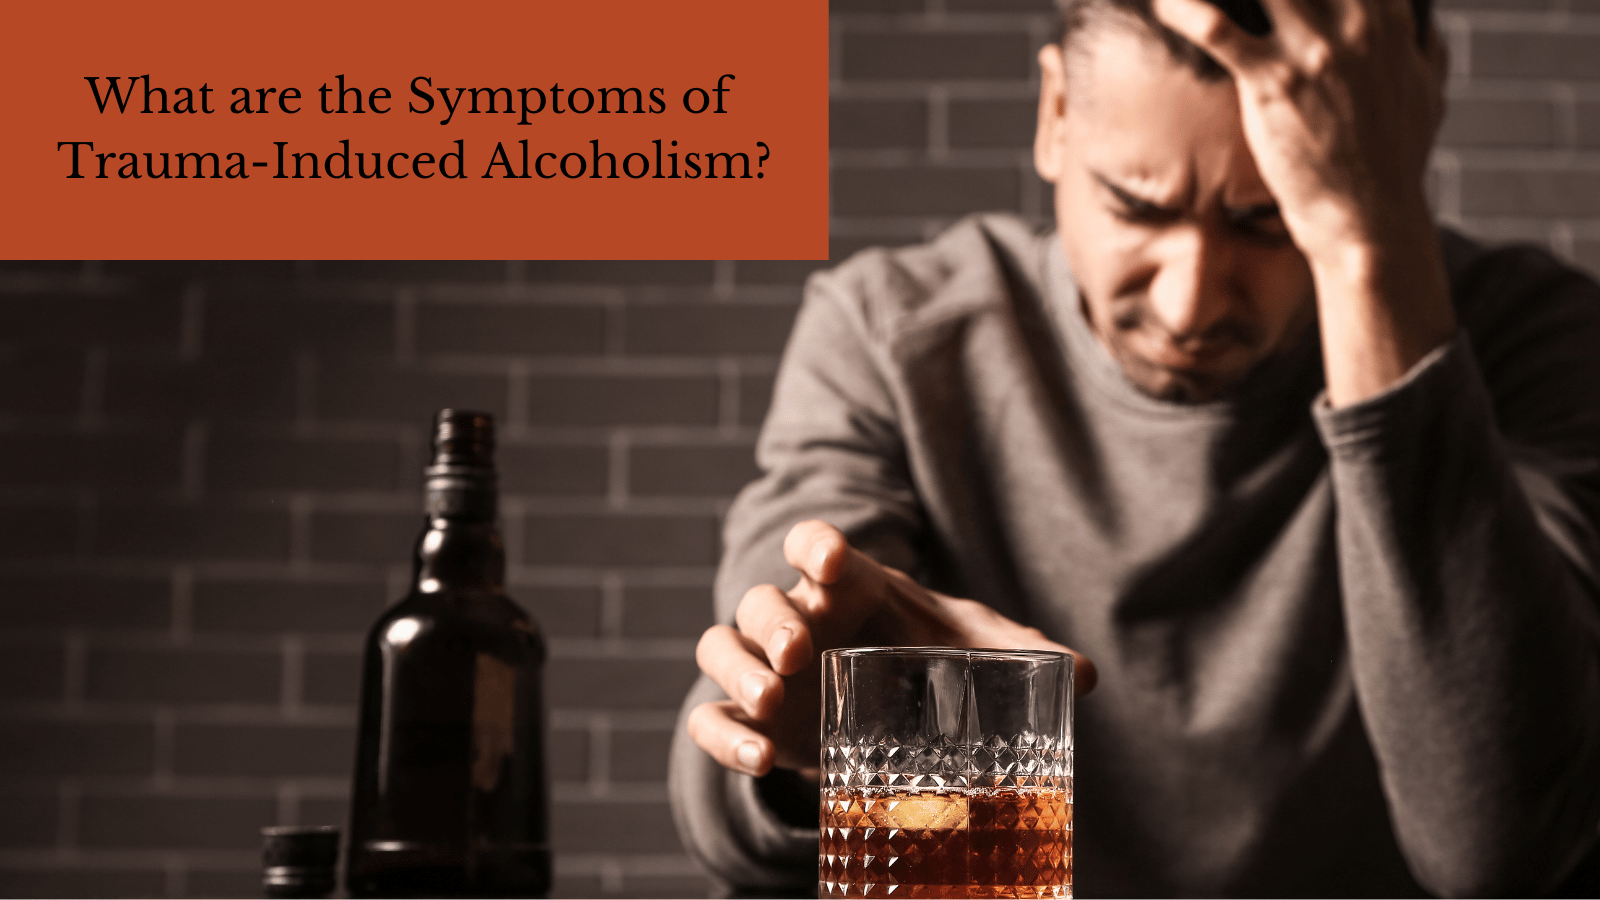 what are the symptoms of trauma-induced alcoholism?